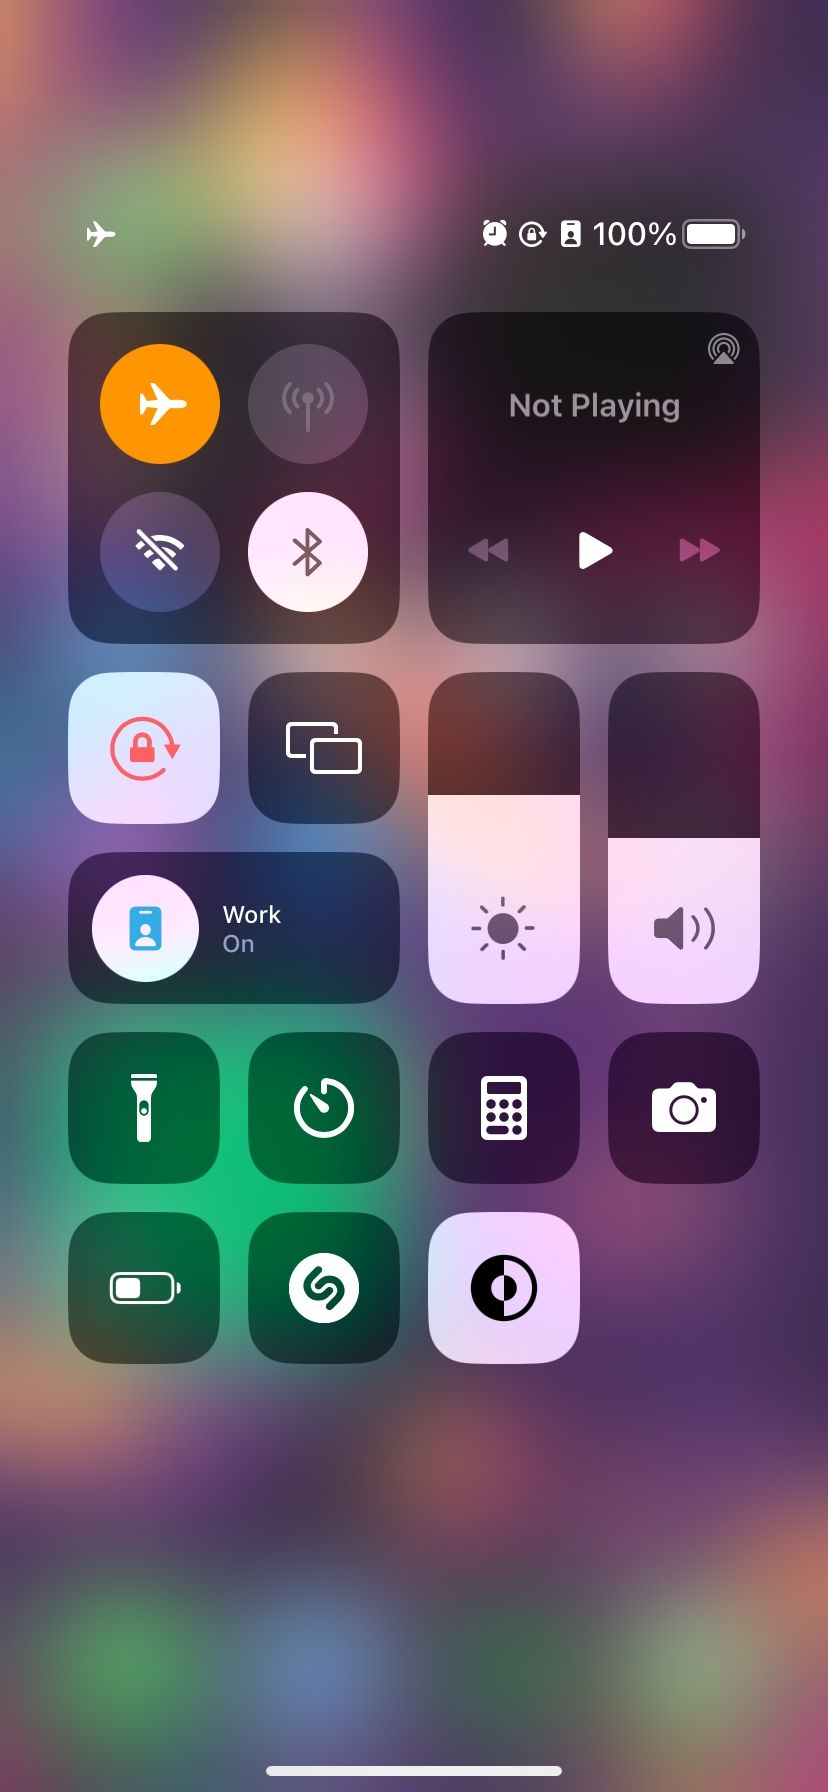 Control Center in iOS with Airplane Mode enabled